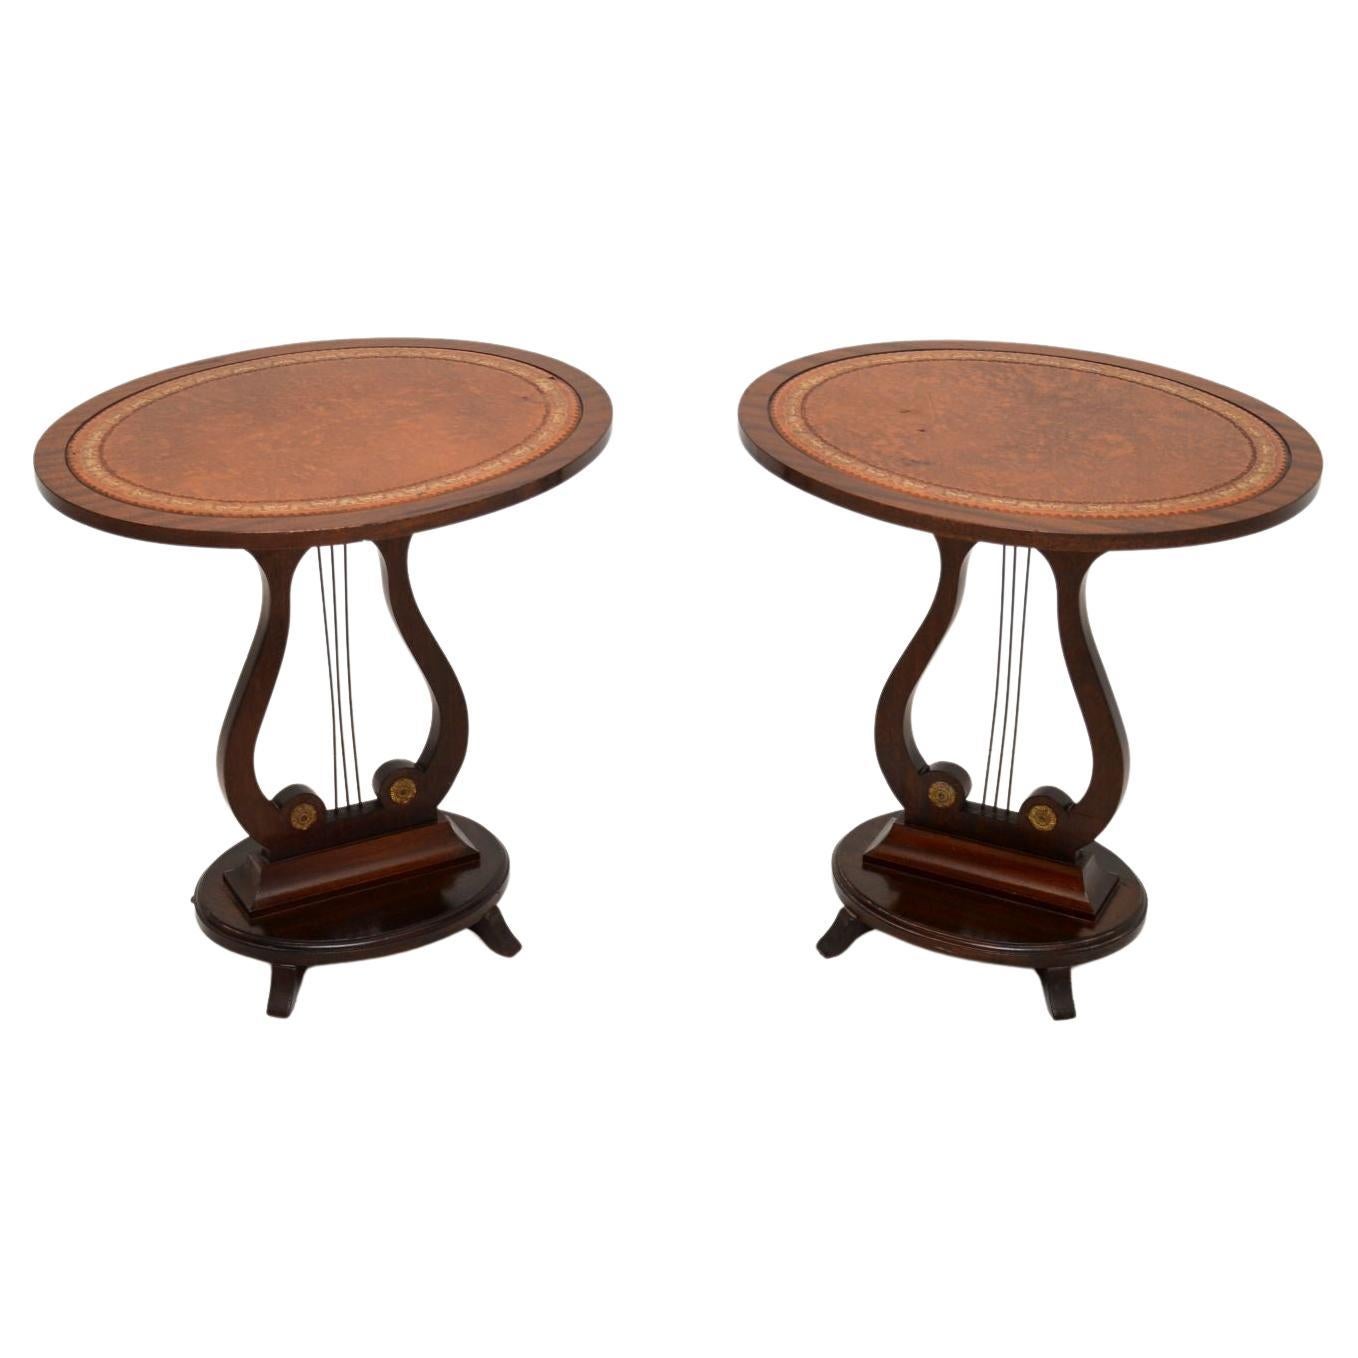 Pair of Antique Regency Style Side Tables For Sale